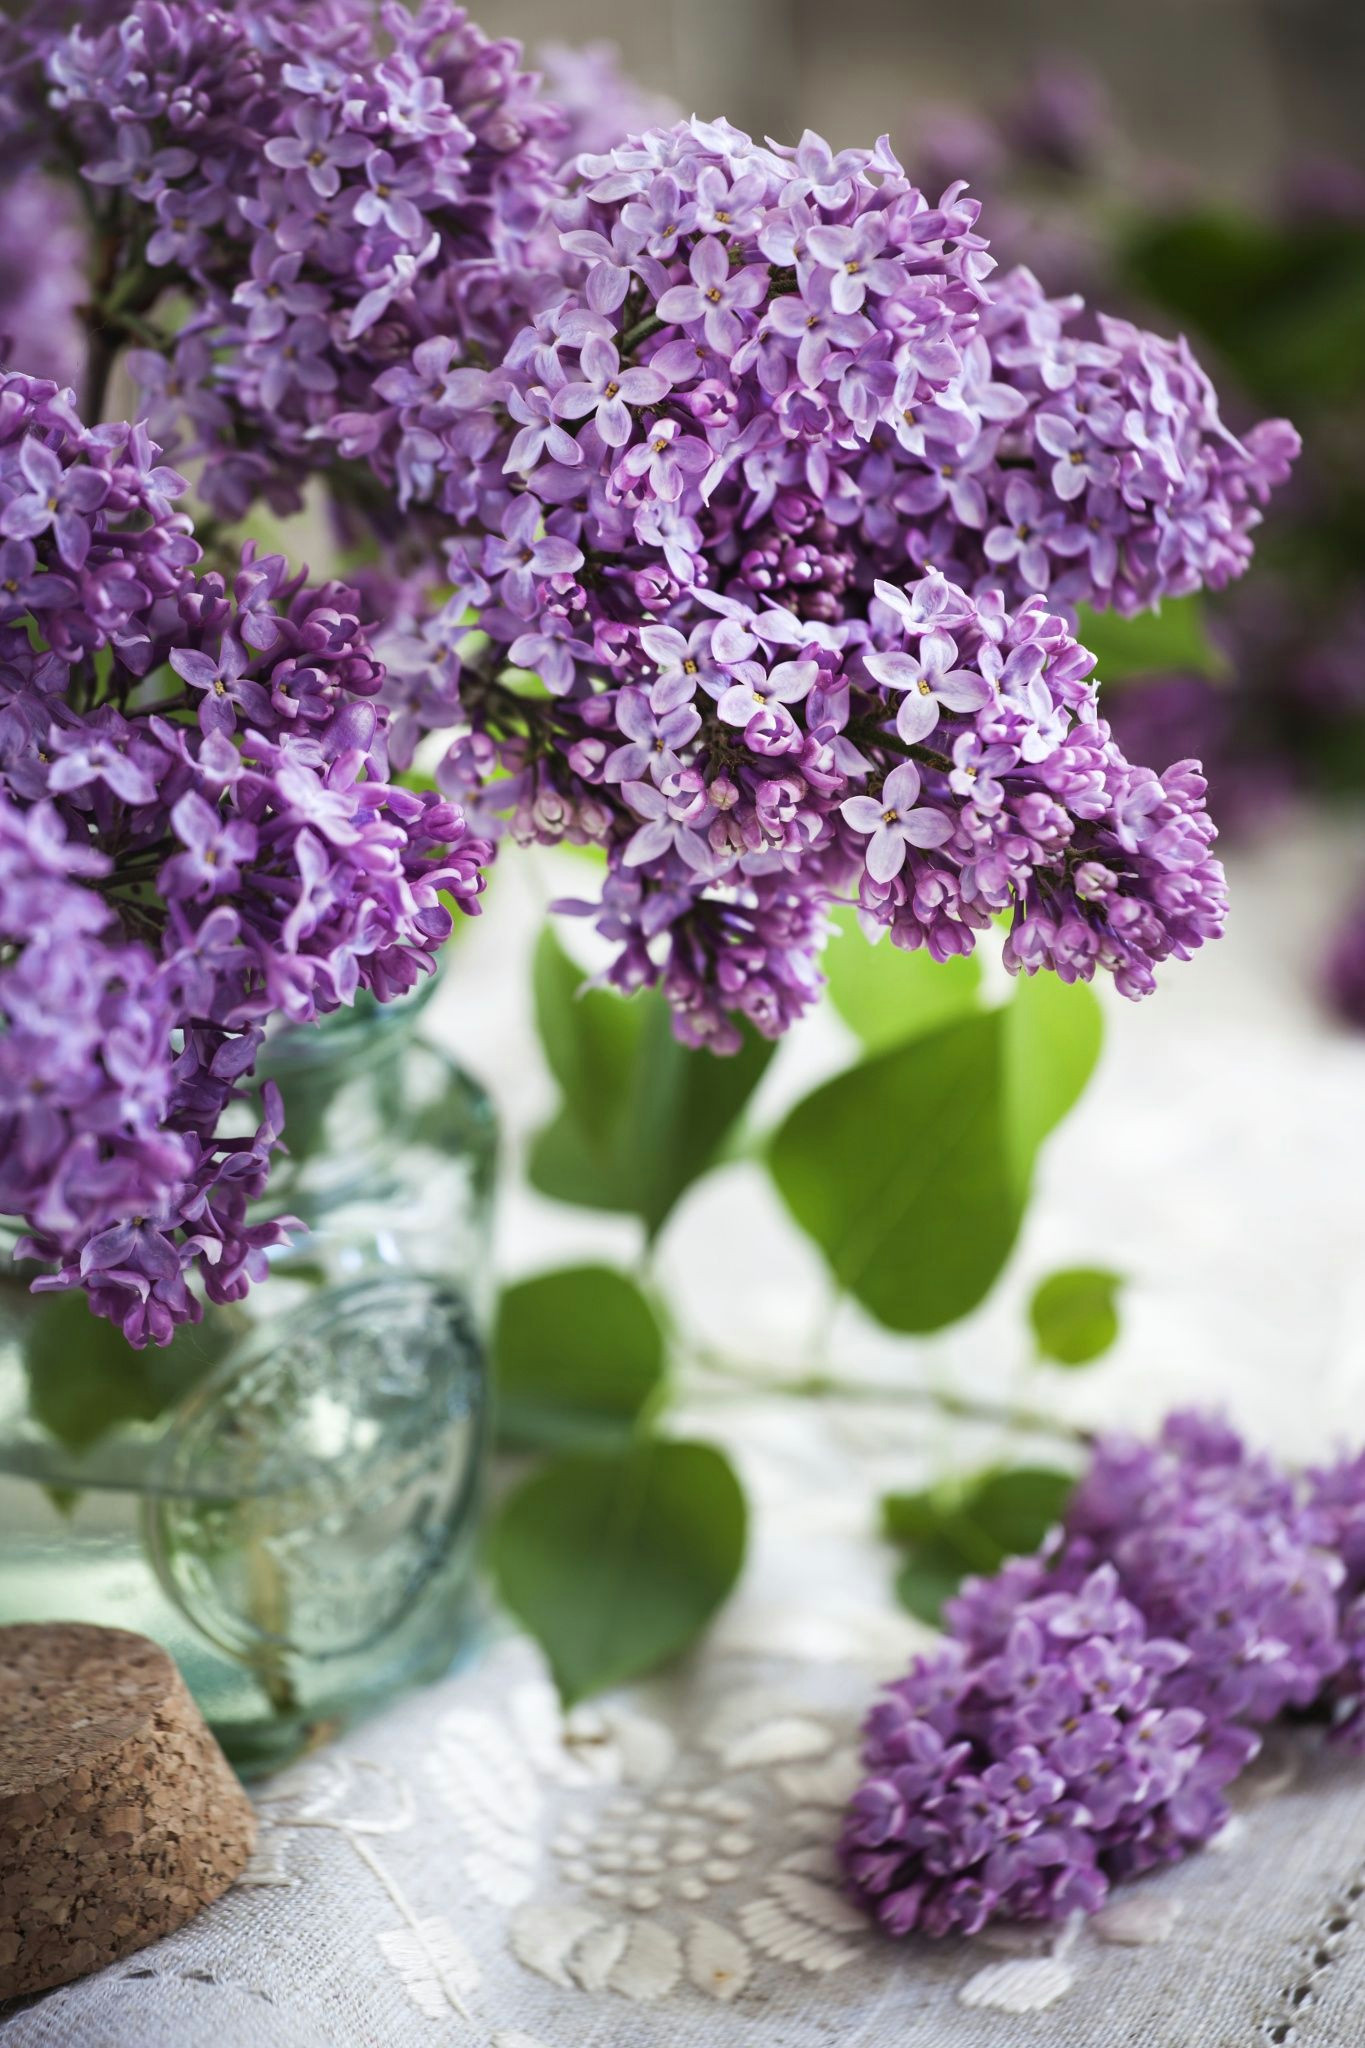 lilac by yulia kotina on 500px a flowers to drawroyalty